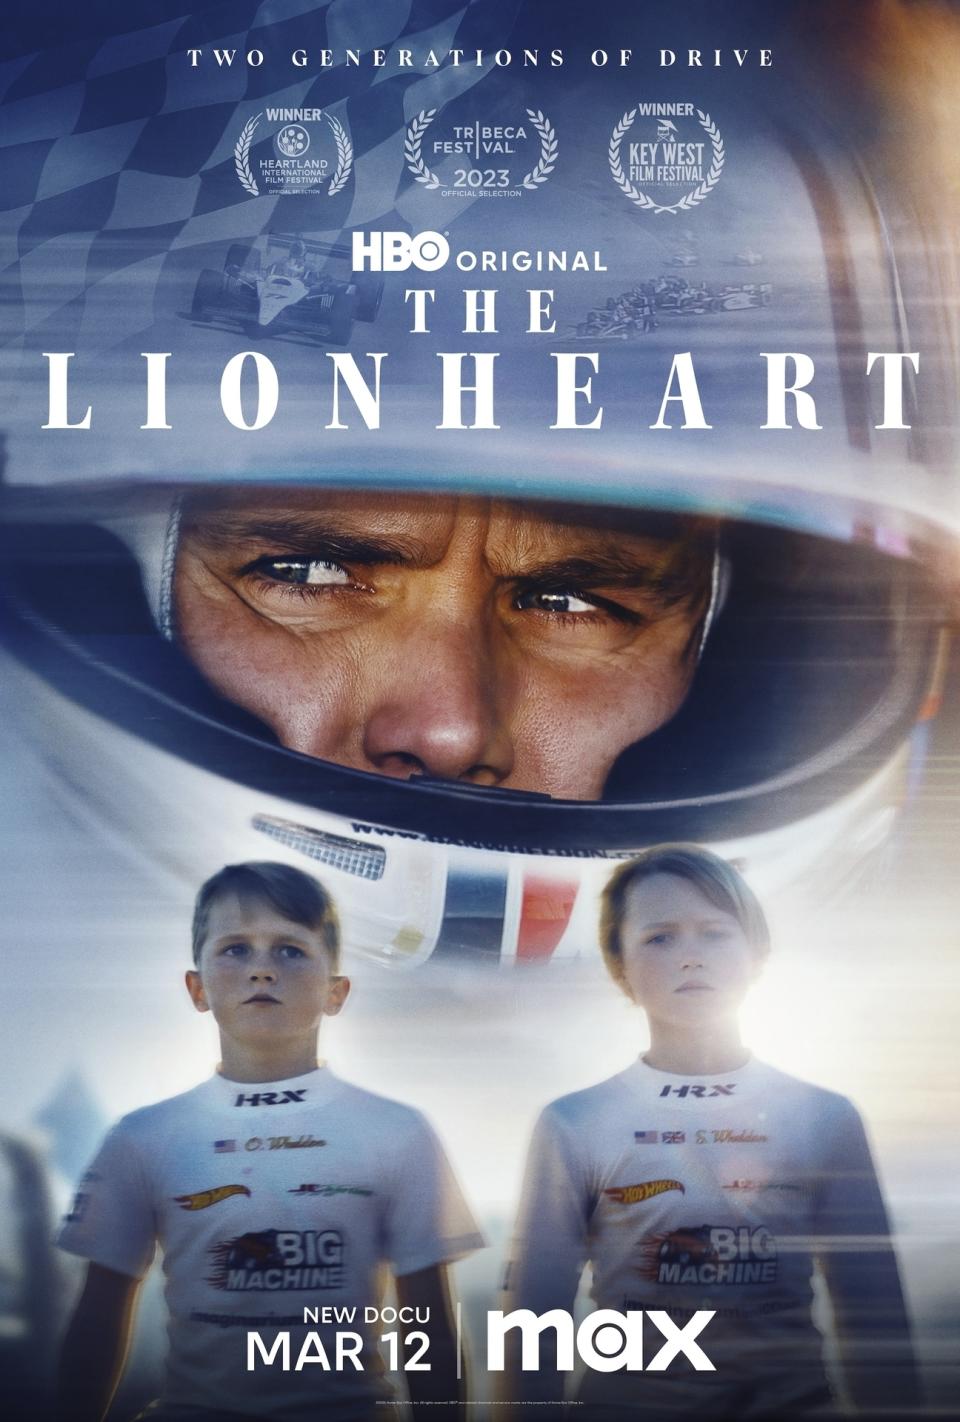 This image released by Max shows promotional art for the HBO documentary "The Lionheart," premiering March 12. (Max via AP)